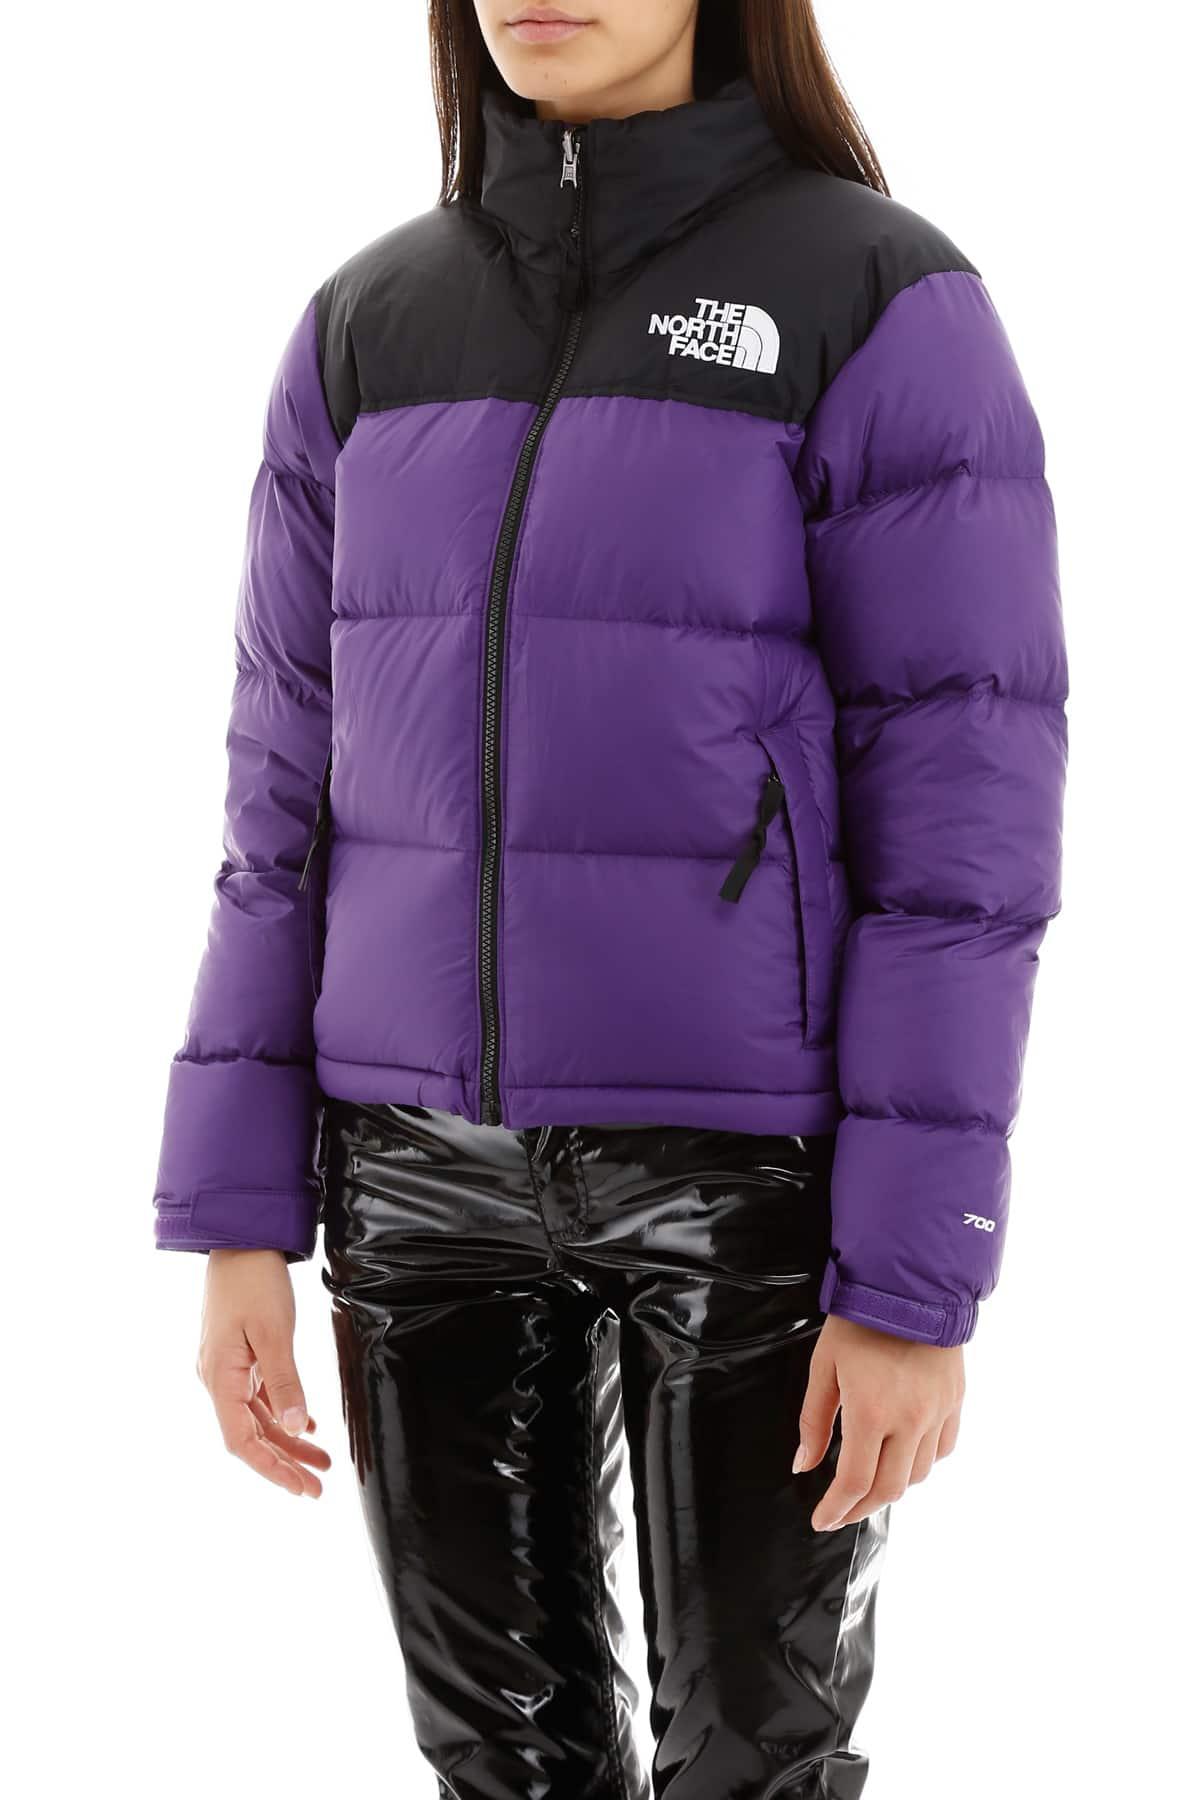 North face puffer jacket light purple 265644-North face puffer jacket ...